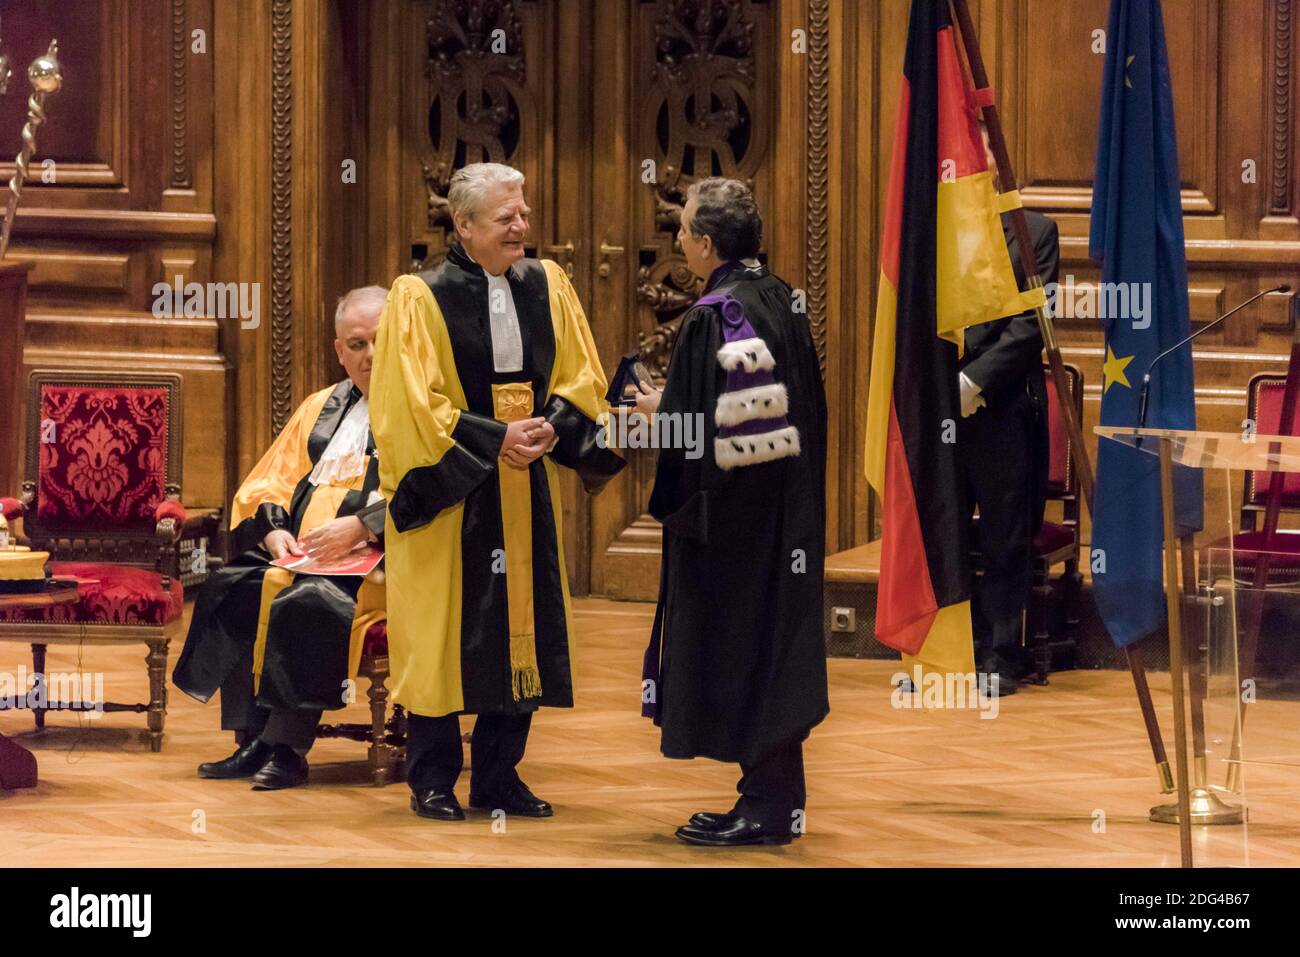 Gilles Pecout, Rector of the Ile-de-France Academic Region, and the President of the Federal Republic of Germany, Joachim Gauck, at a ceremony to award the insignia of Doctor Honoris Causa to the German President at the Grand Amphitheater de la Sorbonne As part of the invitation of honor of France to the Frankfurt Book Fair 2017, Paris, France, January 26, 2017. Photo by Samuel Boivin / ABACAPRESS.COM Stock Photo